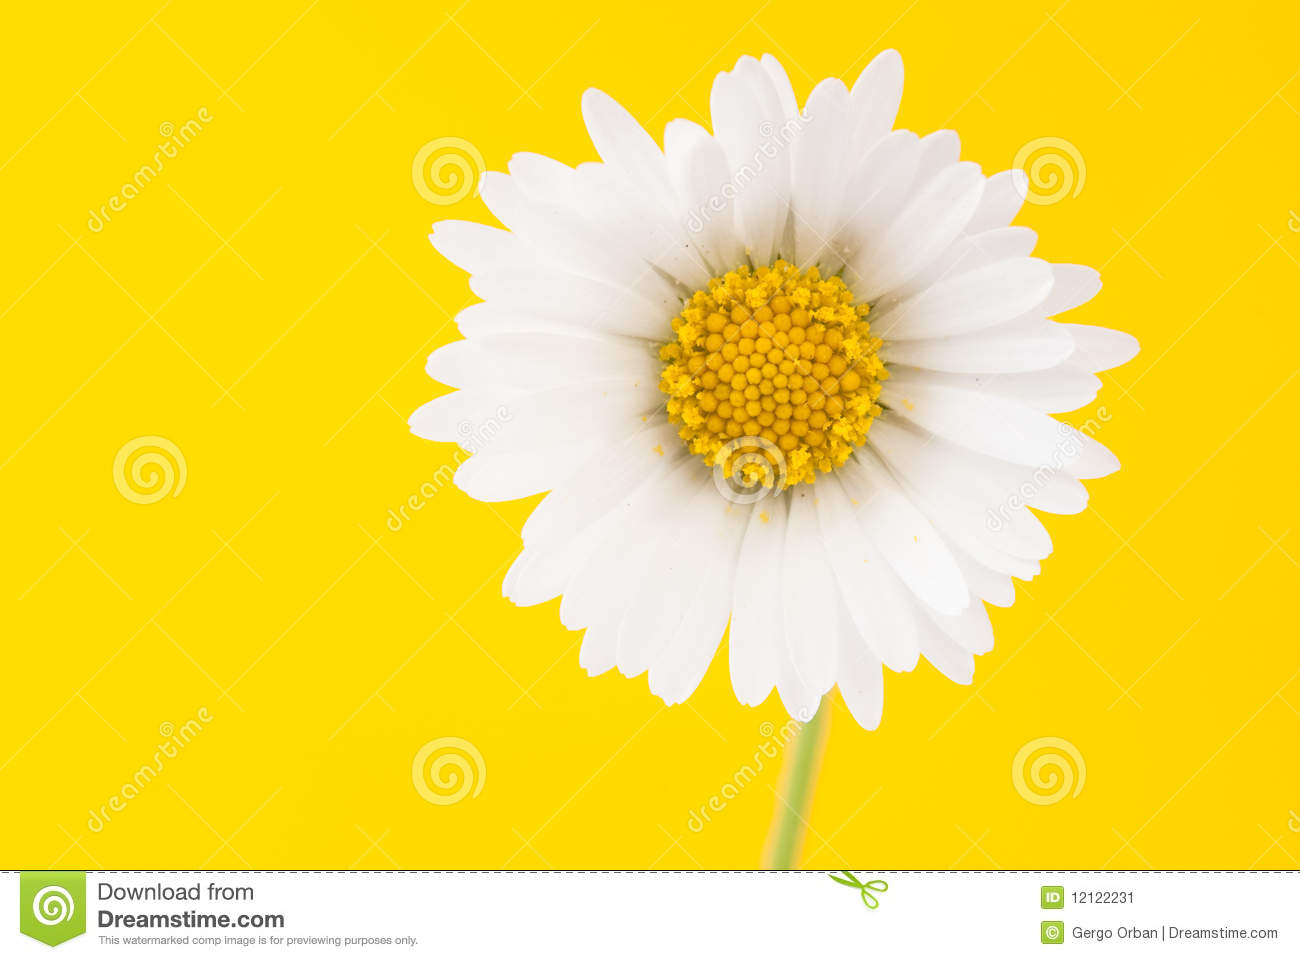 Daisy On A Bright Yellow Background Stock Image   Image  12122231